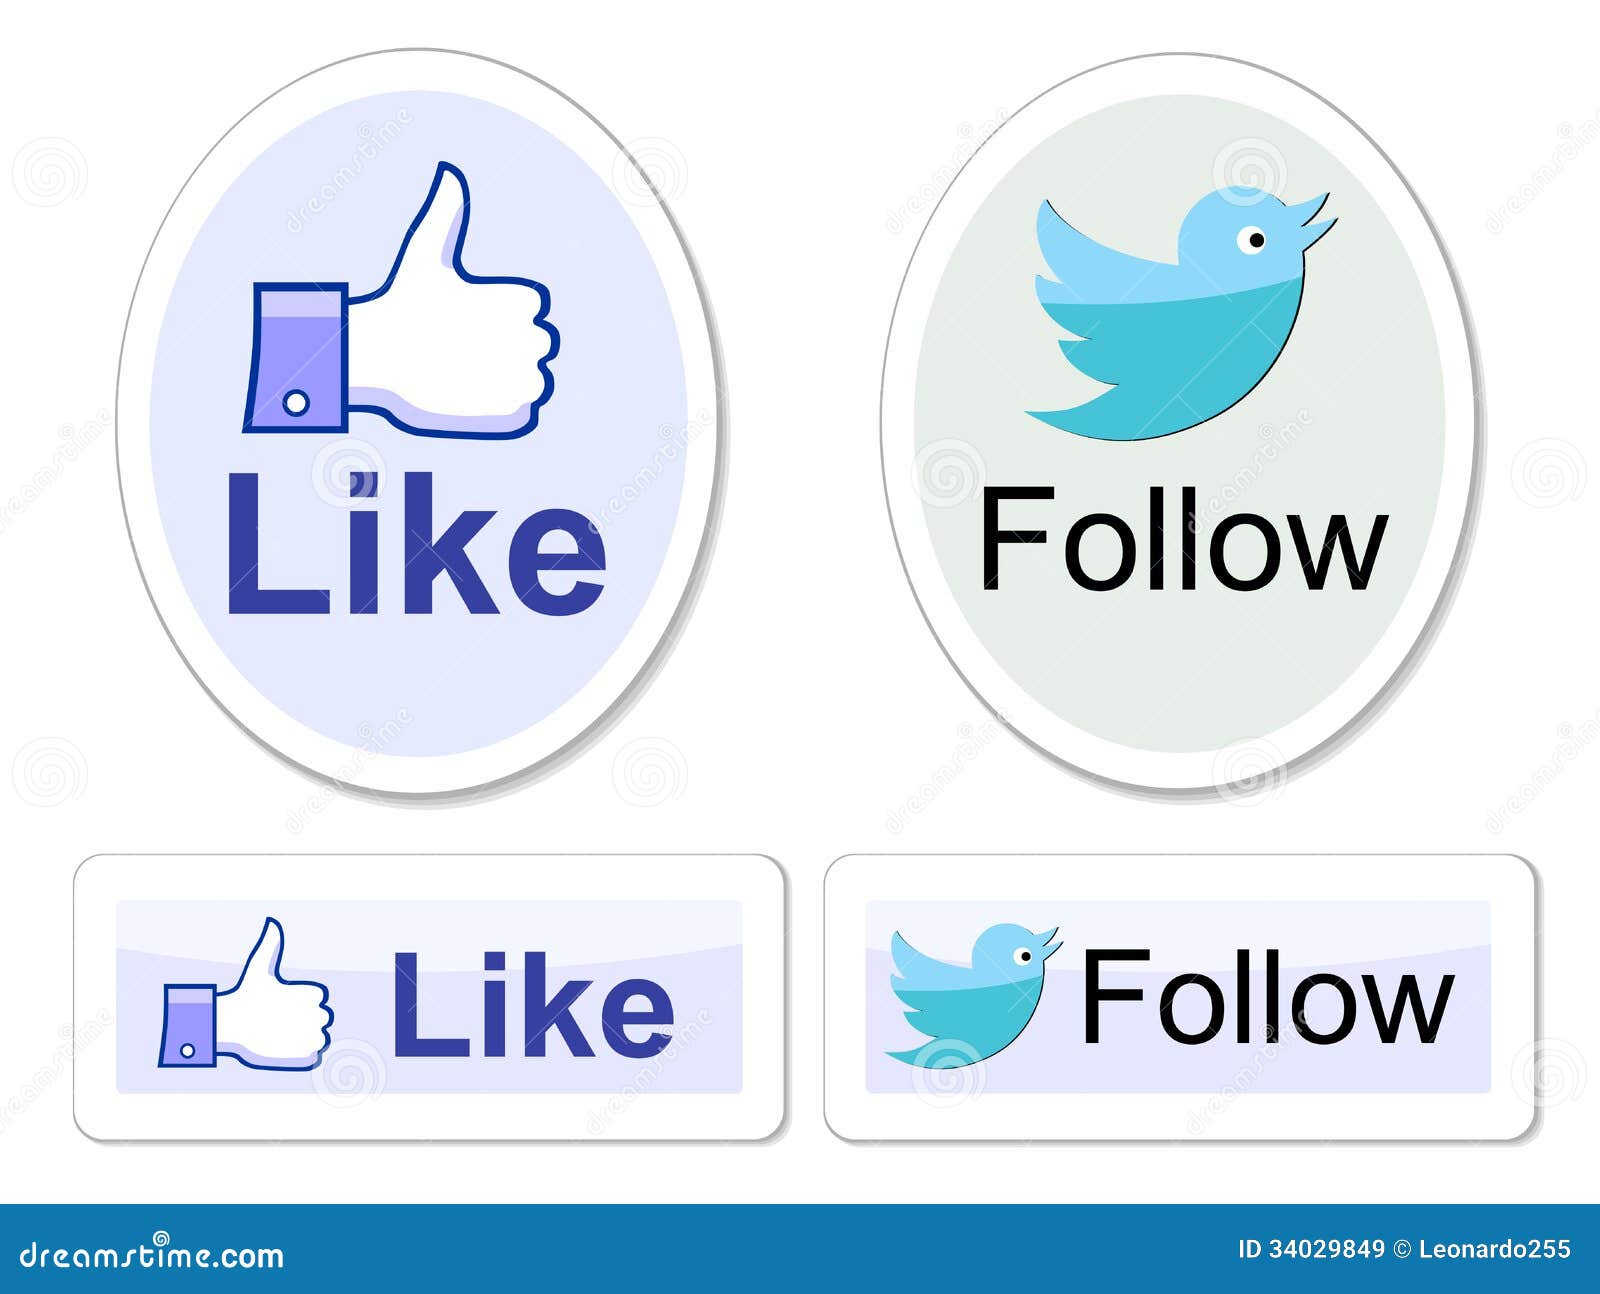 Facebook And Twitter Like It Buttons Editorial Stock Image - Image: 34029849